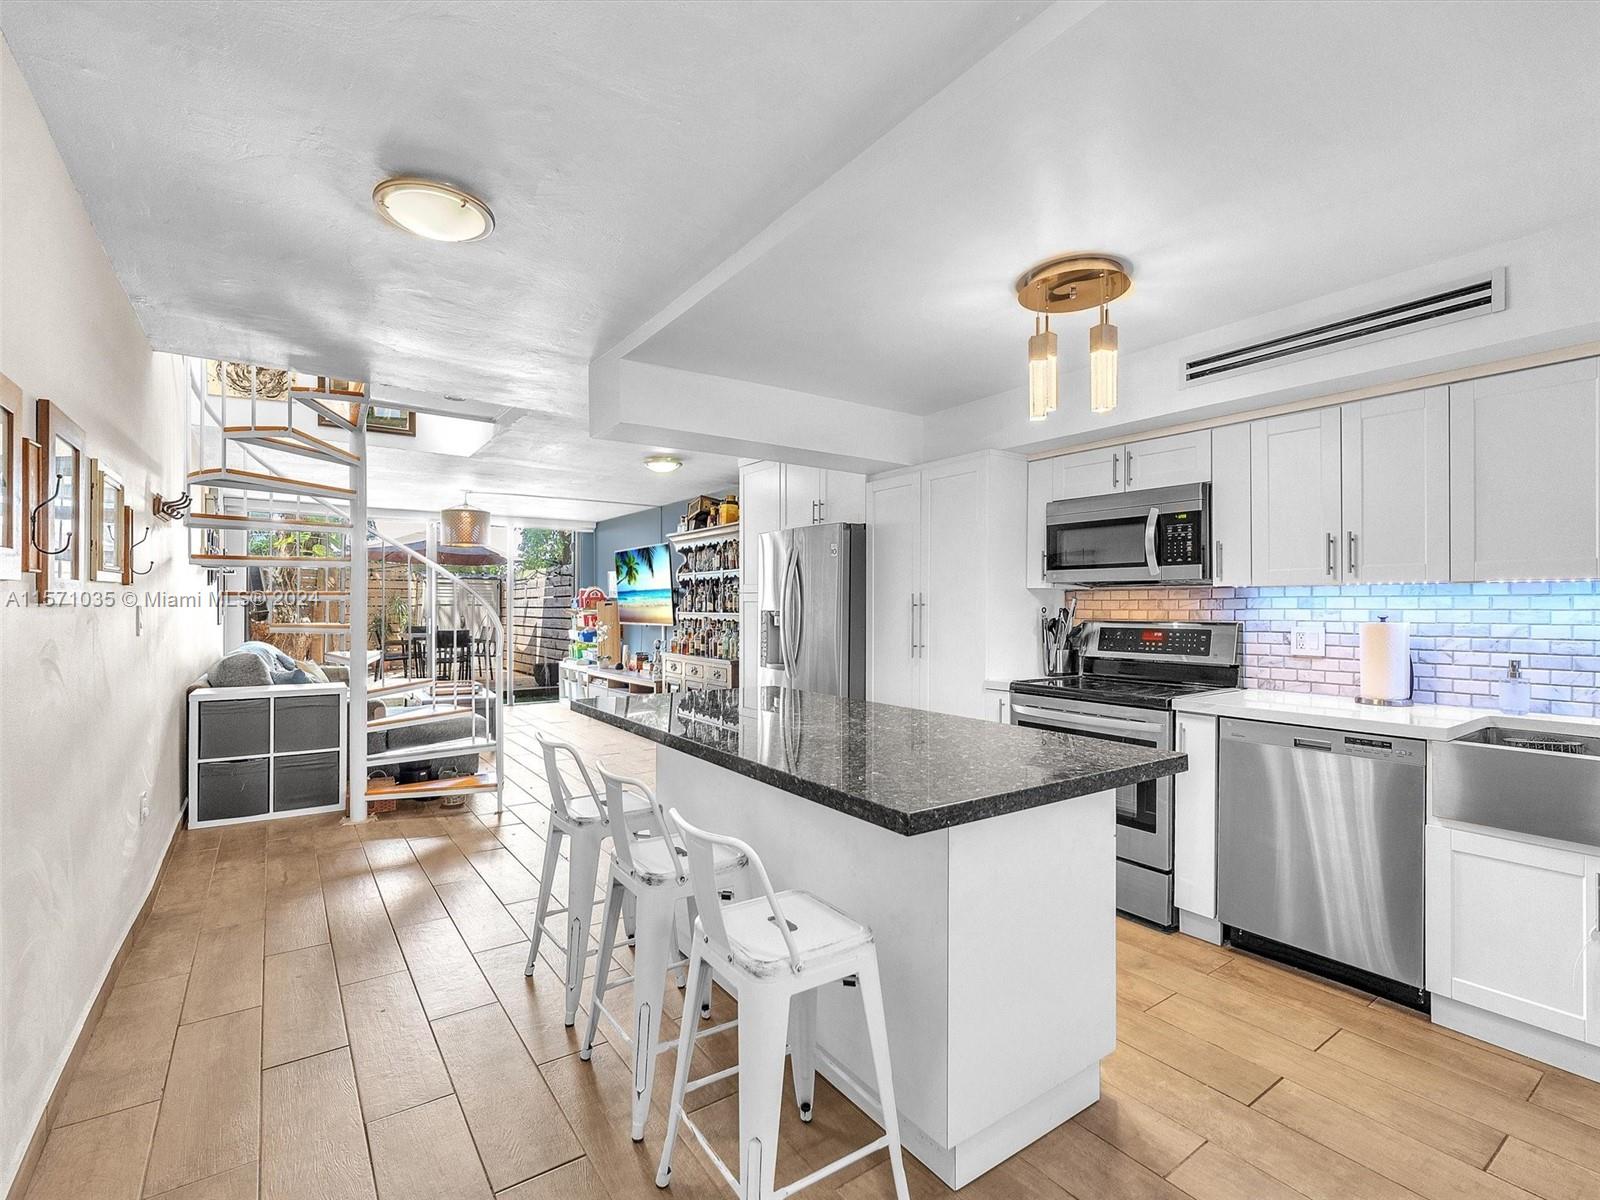 a kitchen with stainless steel appliances granite countertop a stove oven and a sink with granite countertops